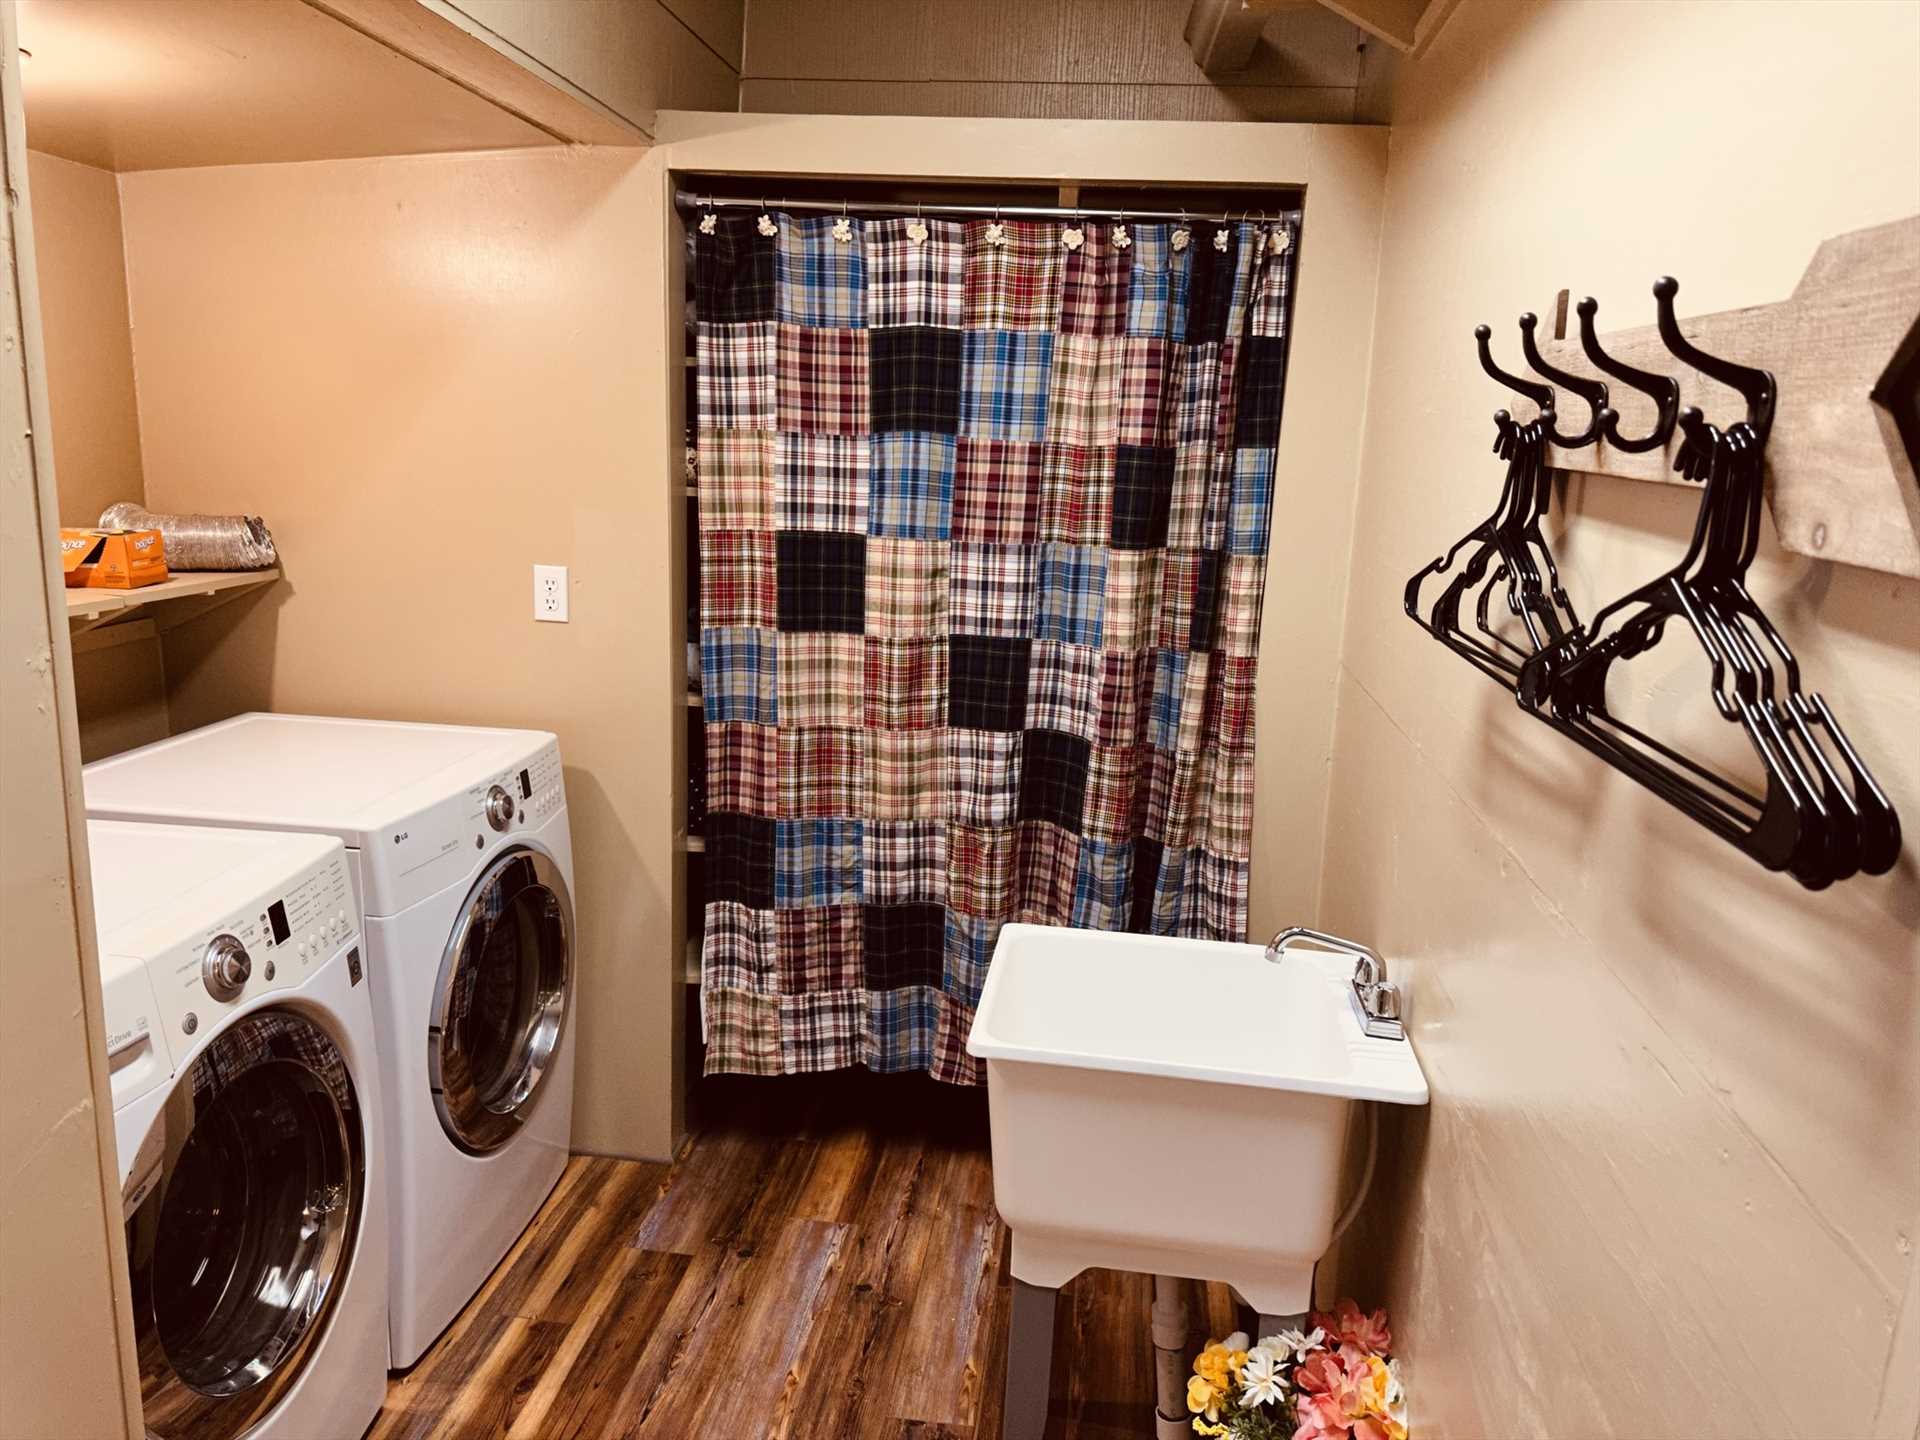                                                 The utility room features a washer and dryer combo and industrial sink. No need to take dirty laundry home after your holiday!